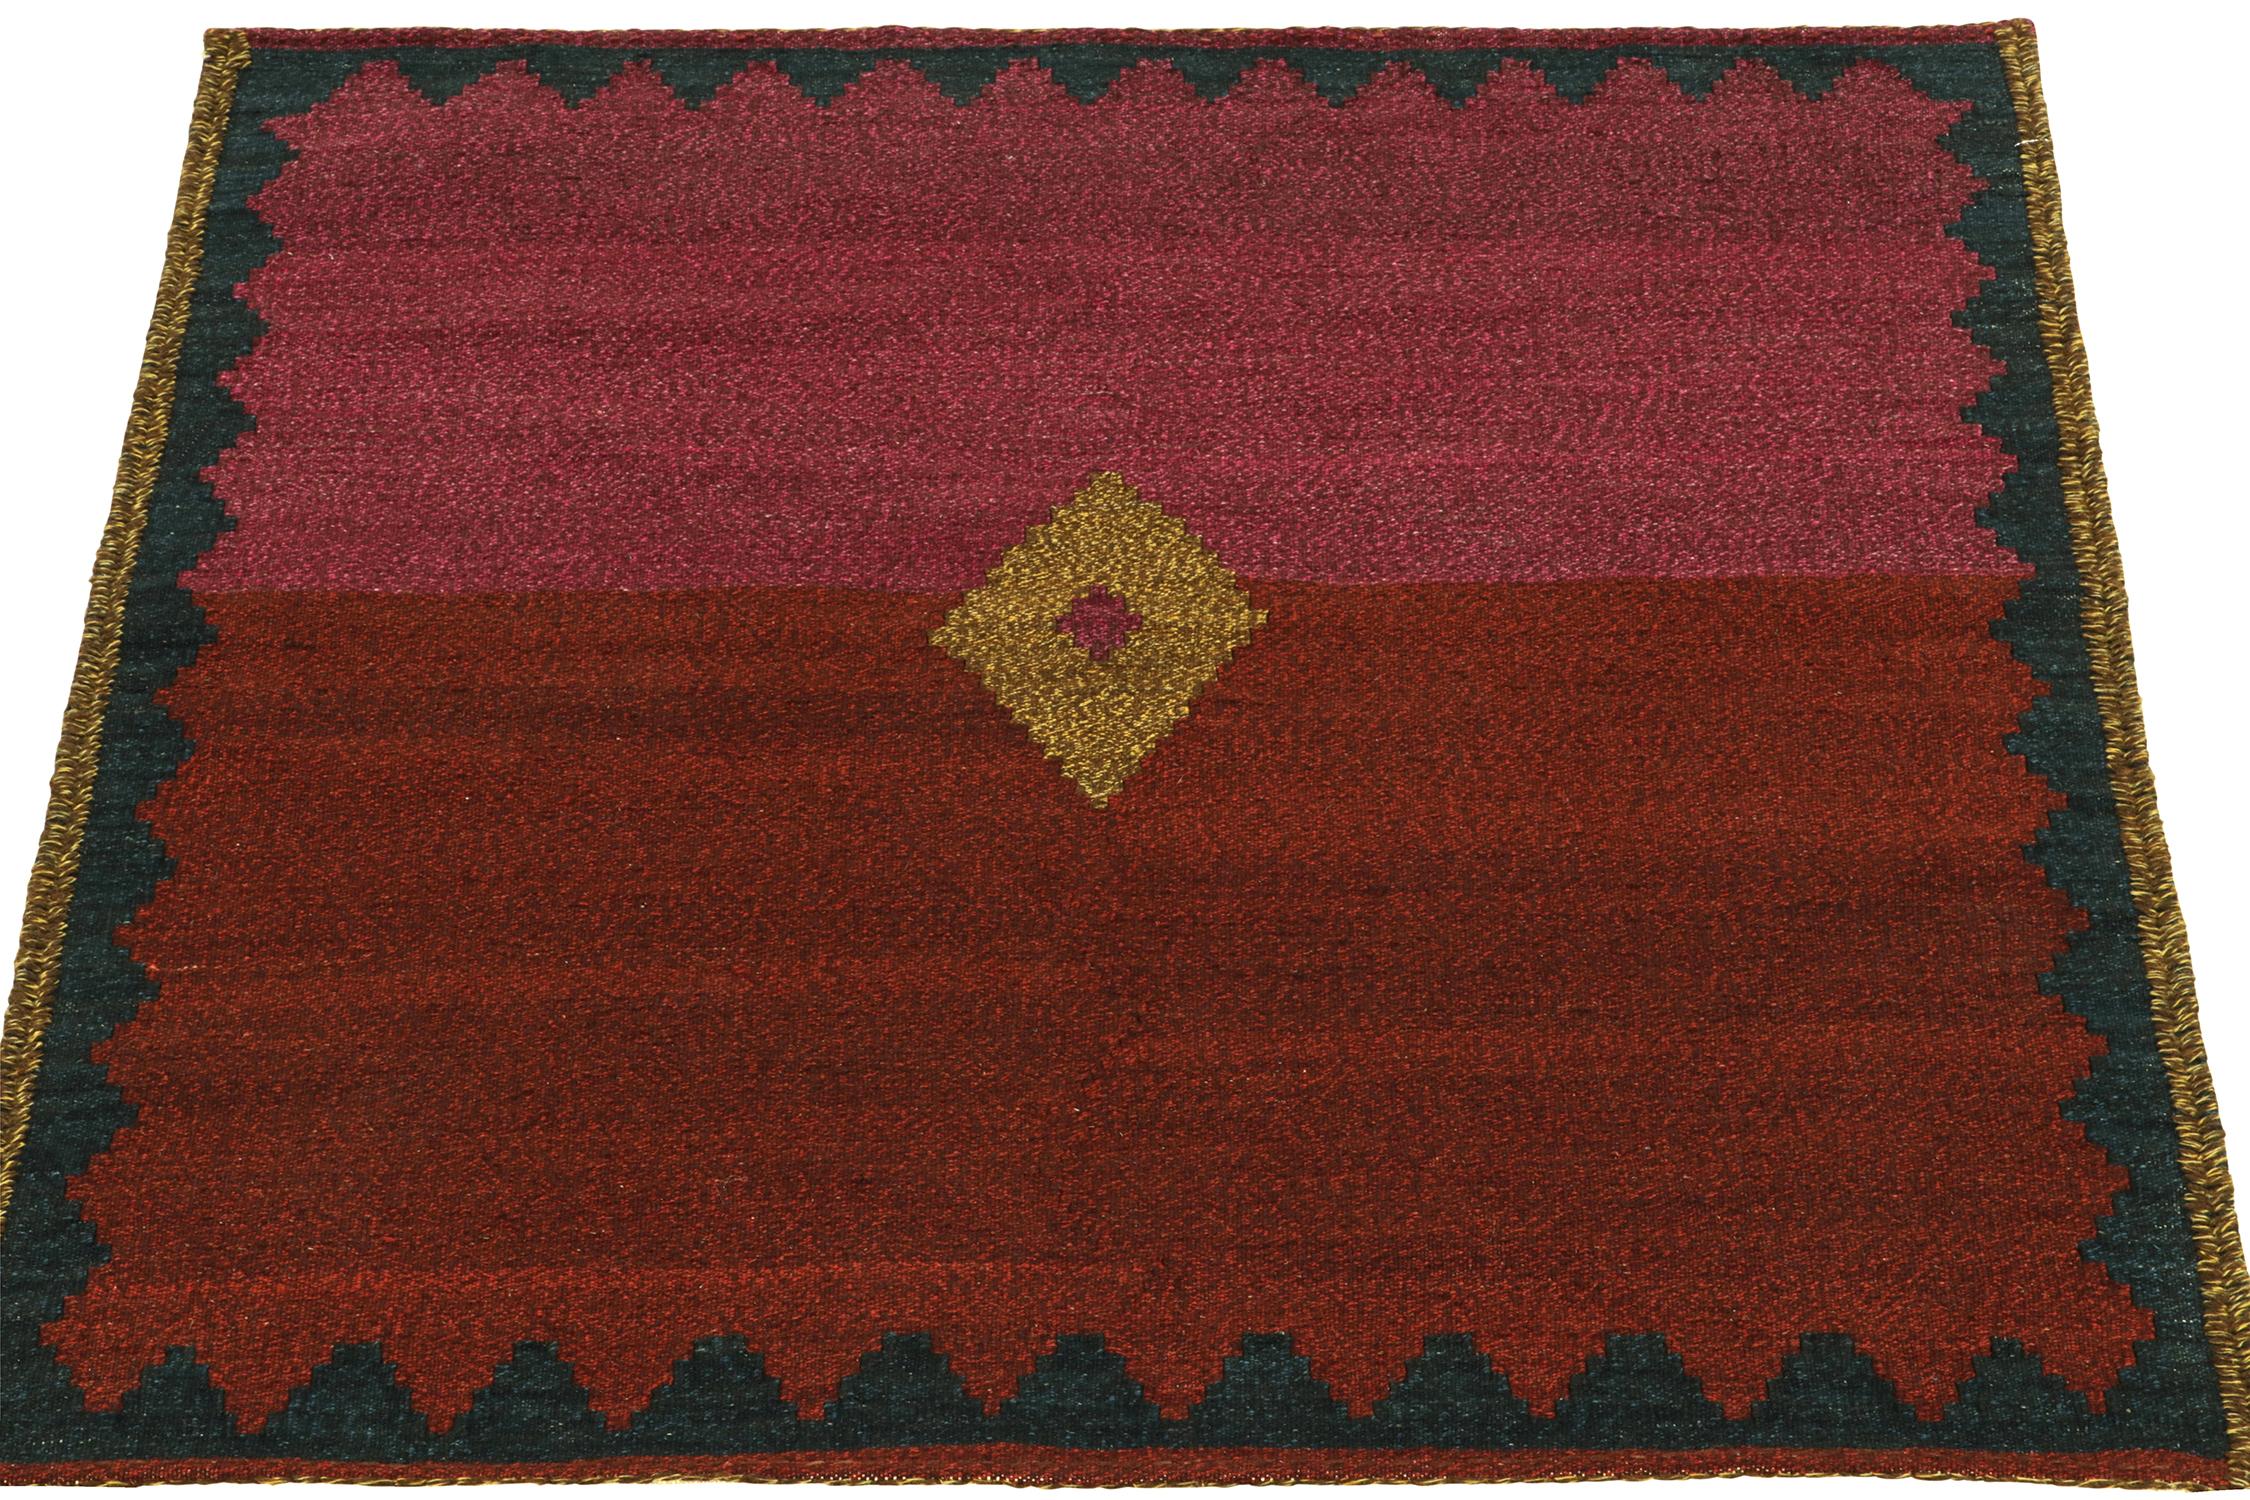 Handwoven in wool circa 1980-1990, from a rare vintage curation of small-sized Sofreh Kilim pieces now joining our classic collection. Distinguished for its 4x4 size, rich striae of colors, and durability among Persian flat weaves of its time.